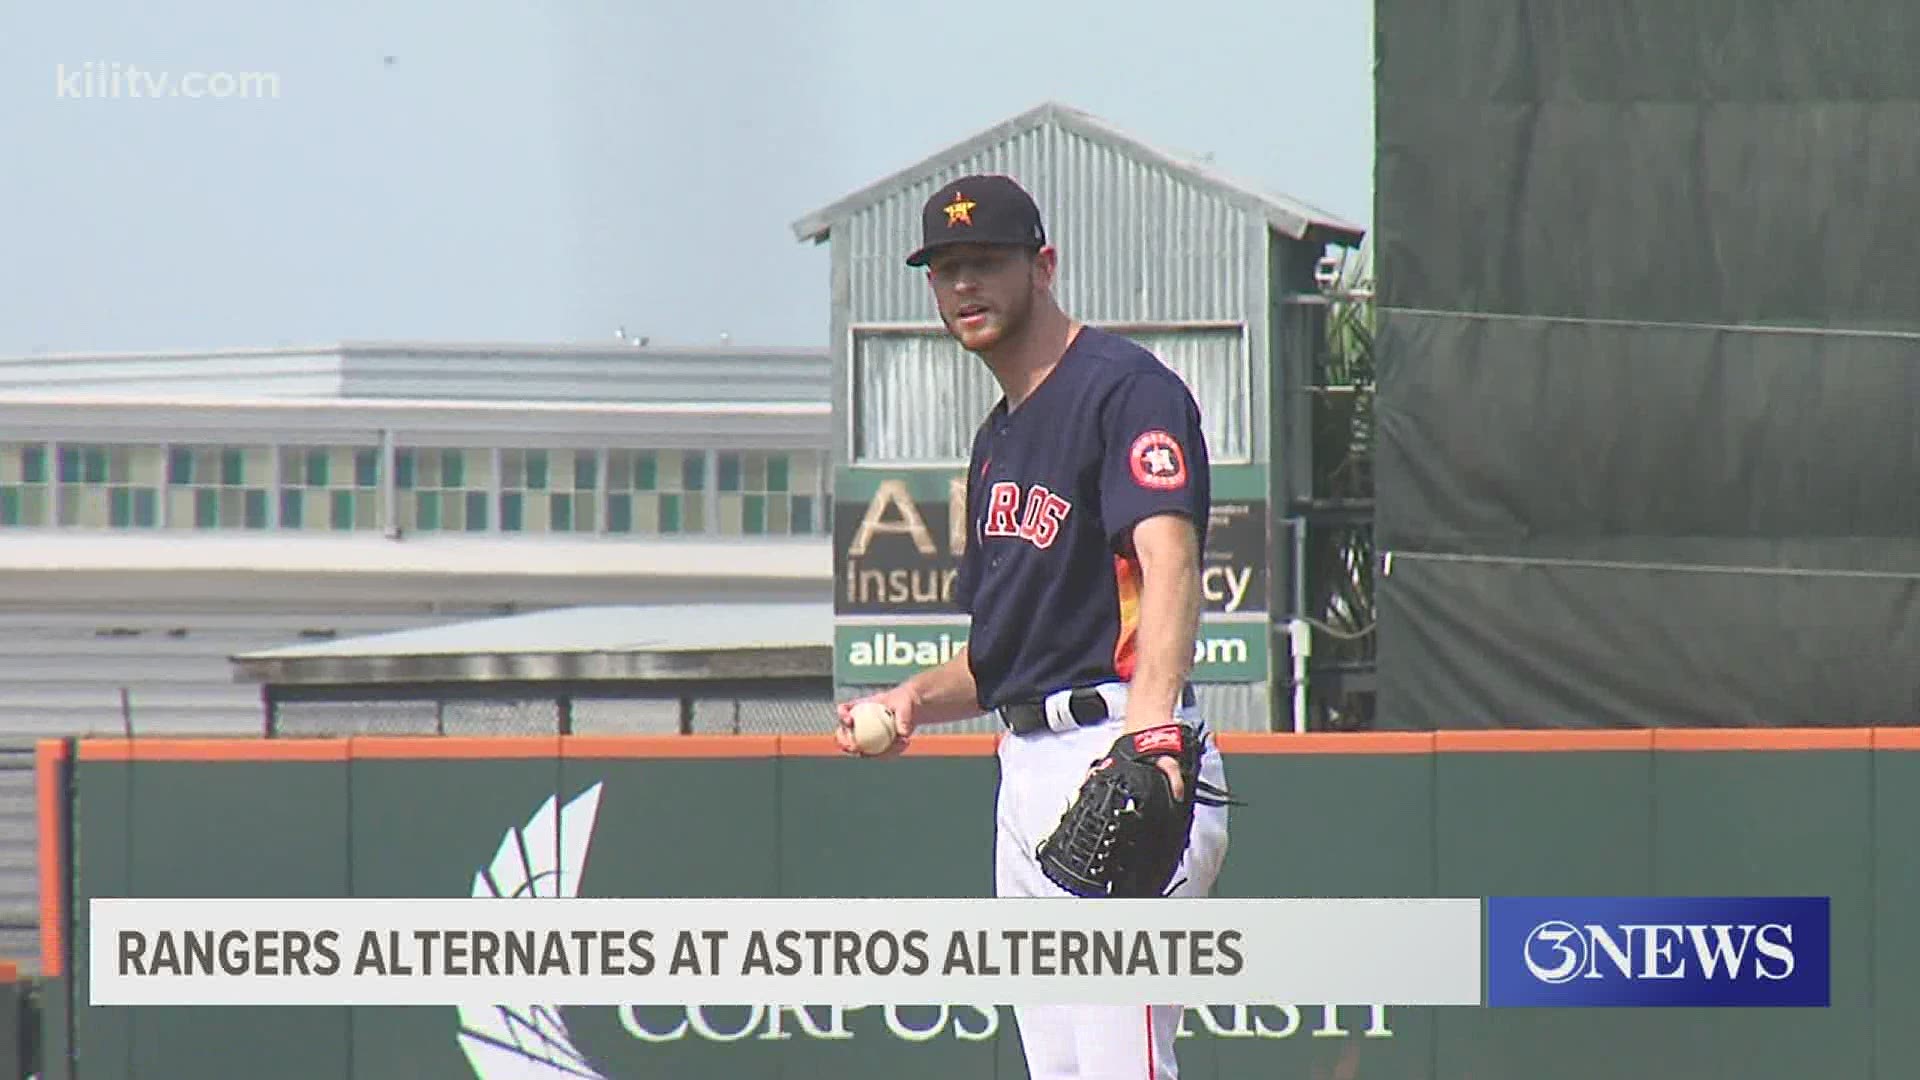 The Astros' alternates got a solid outing from top 10 prospect Tyler Ivey as both teams finished tied 1-1. Ivey pitched five shutout innings and allowed one hit.